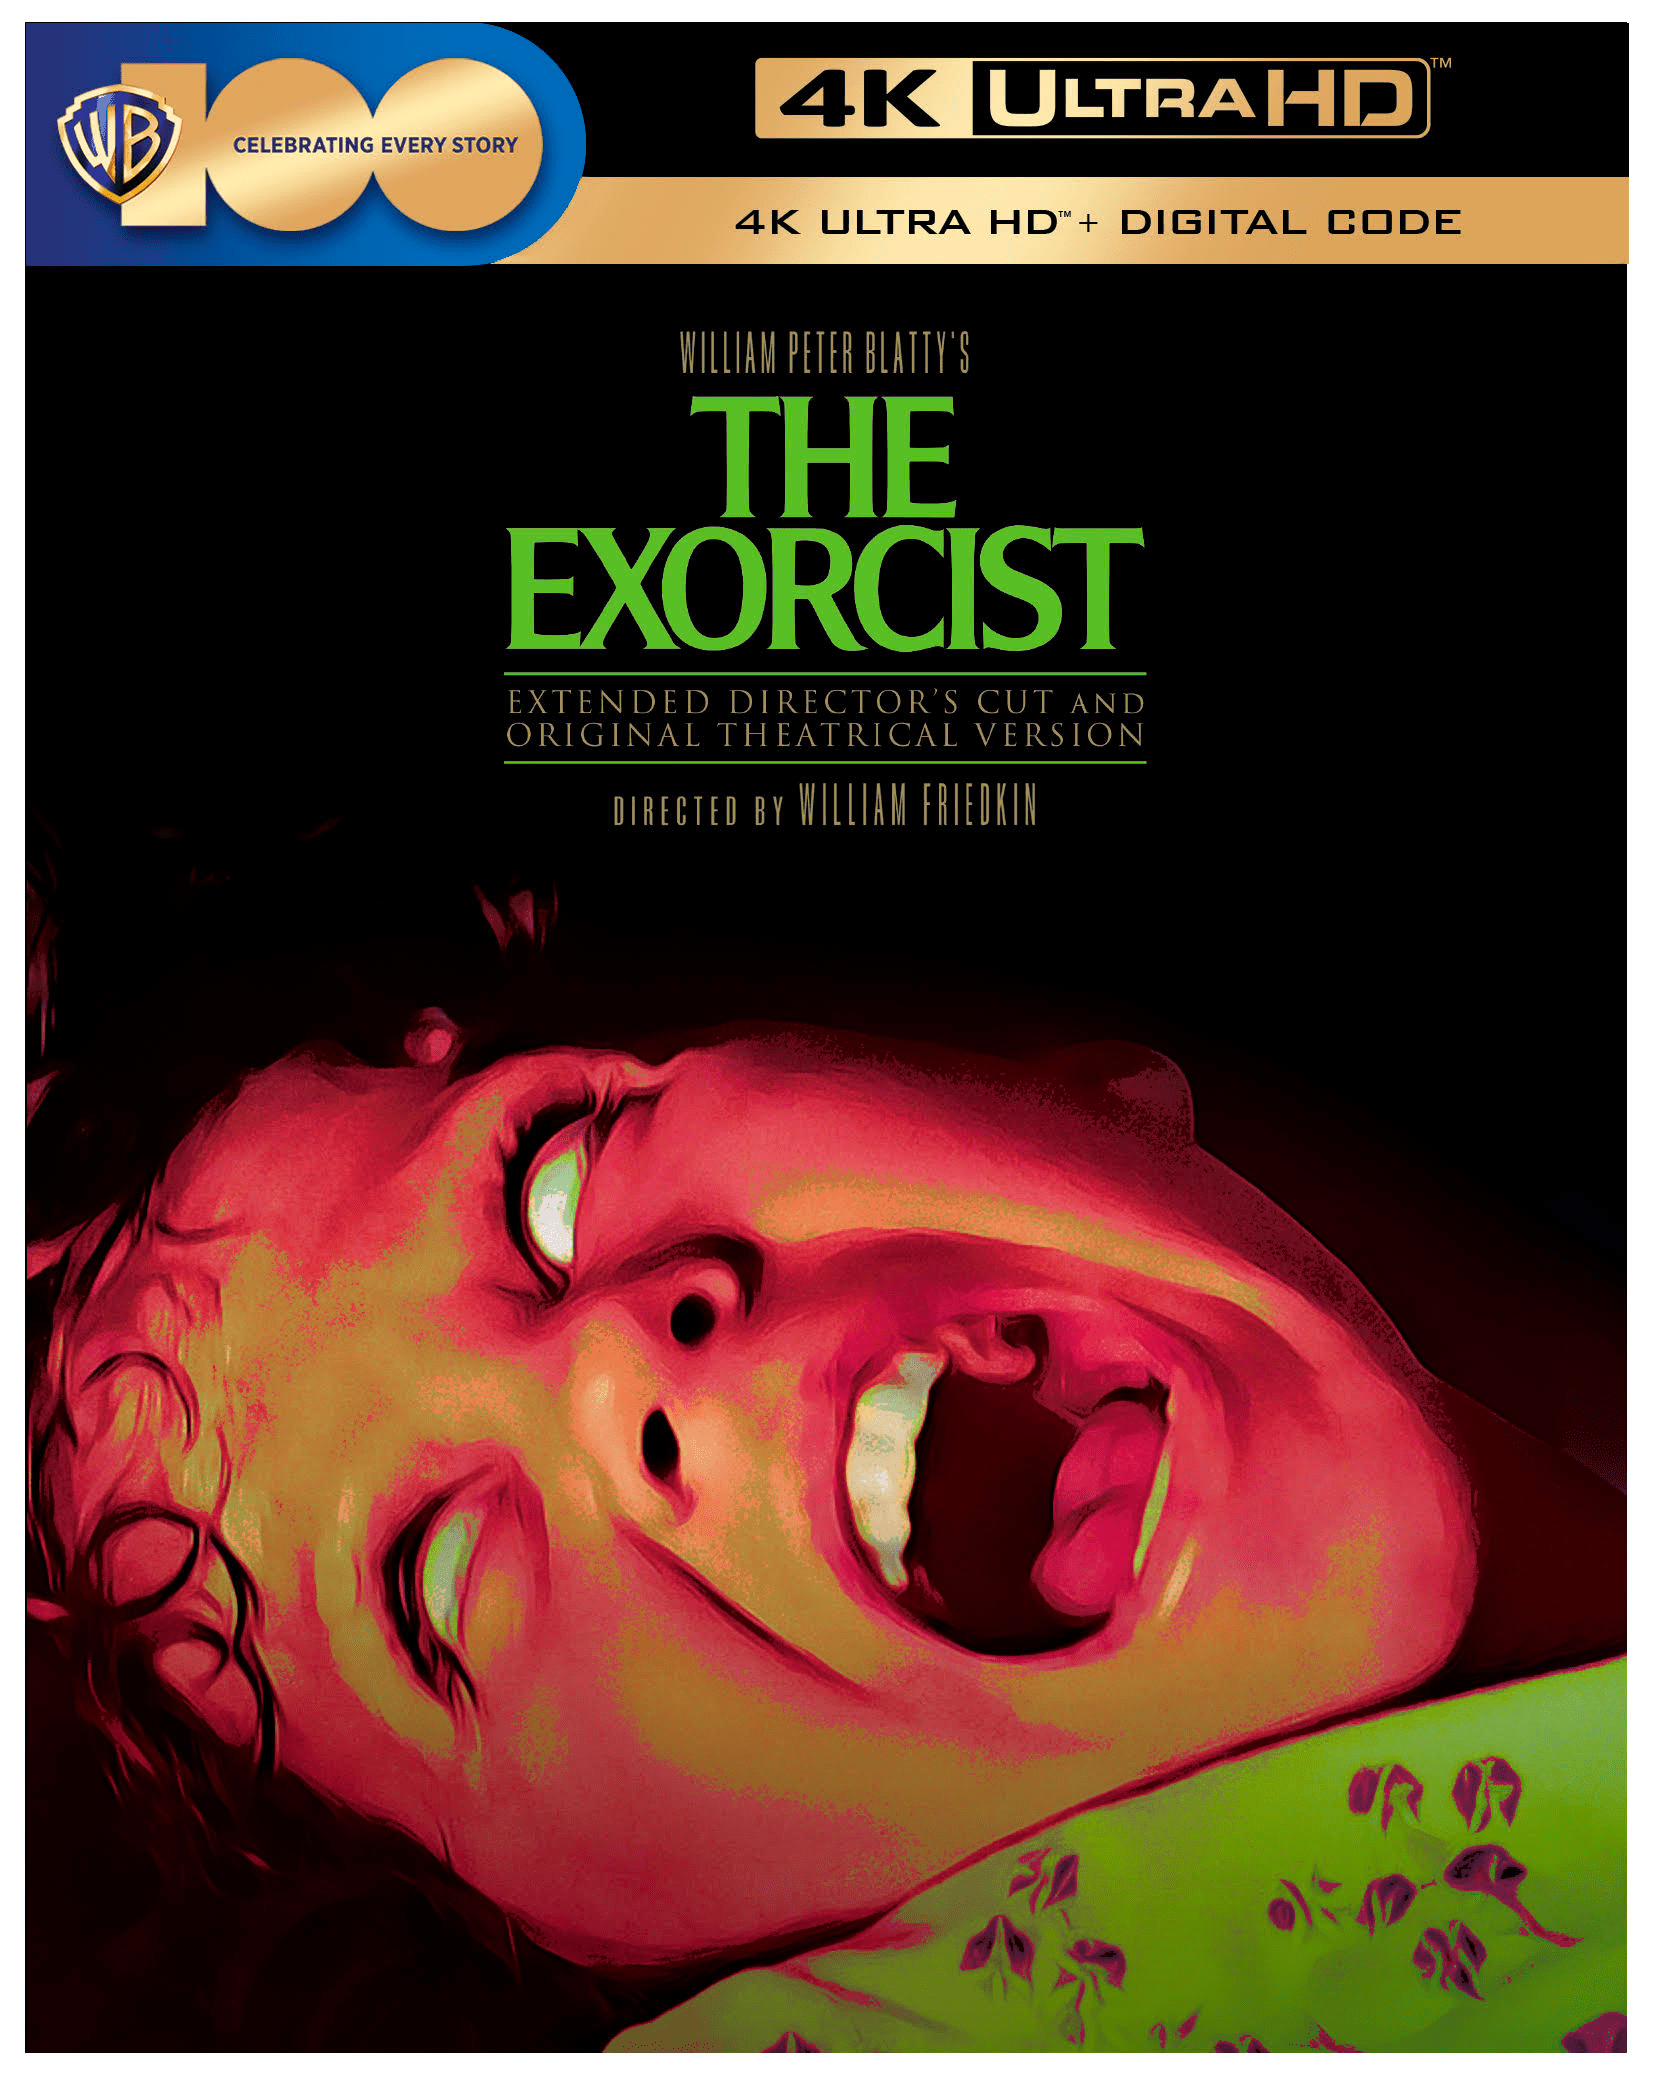 The Exorcist 4K UHD Bluray and Digital Release Date Set for 50th